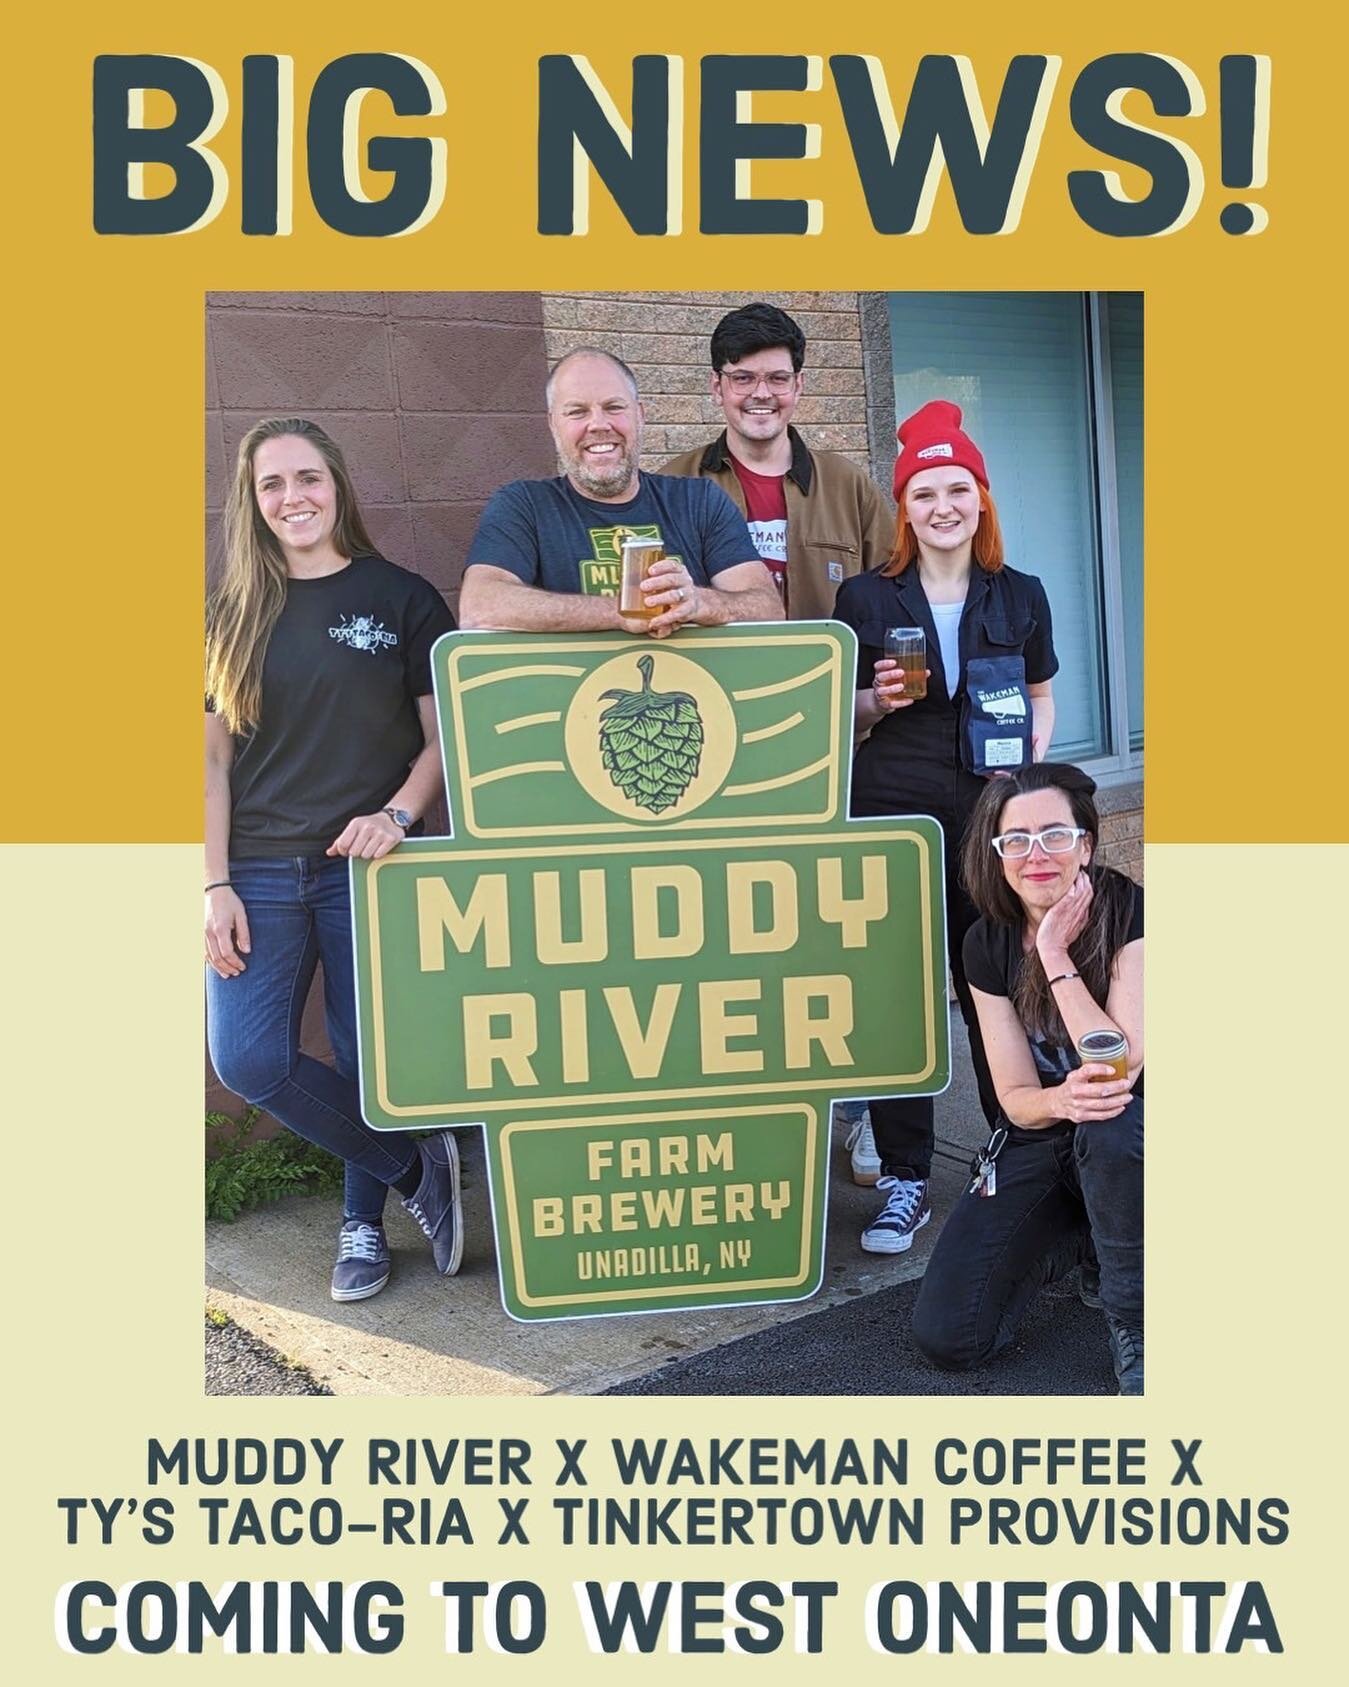 Making your dreams come true! 
🌮 🍻 ☕️ 🌶️ 

Check out the article in the Daily Star for more info 🤩
https://www.thedailystar.com/news/muddy-river-brewery-set-to-expand-to-west-oneonta/article_4fd7a680-e546-11ed-ae26-f37b39a73209.html